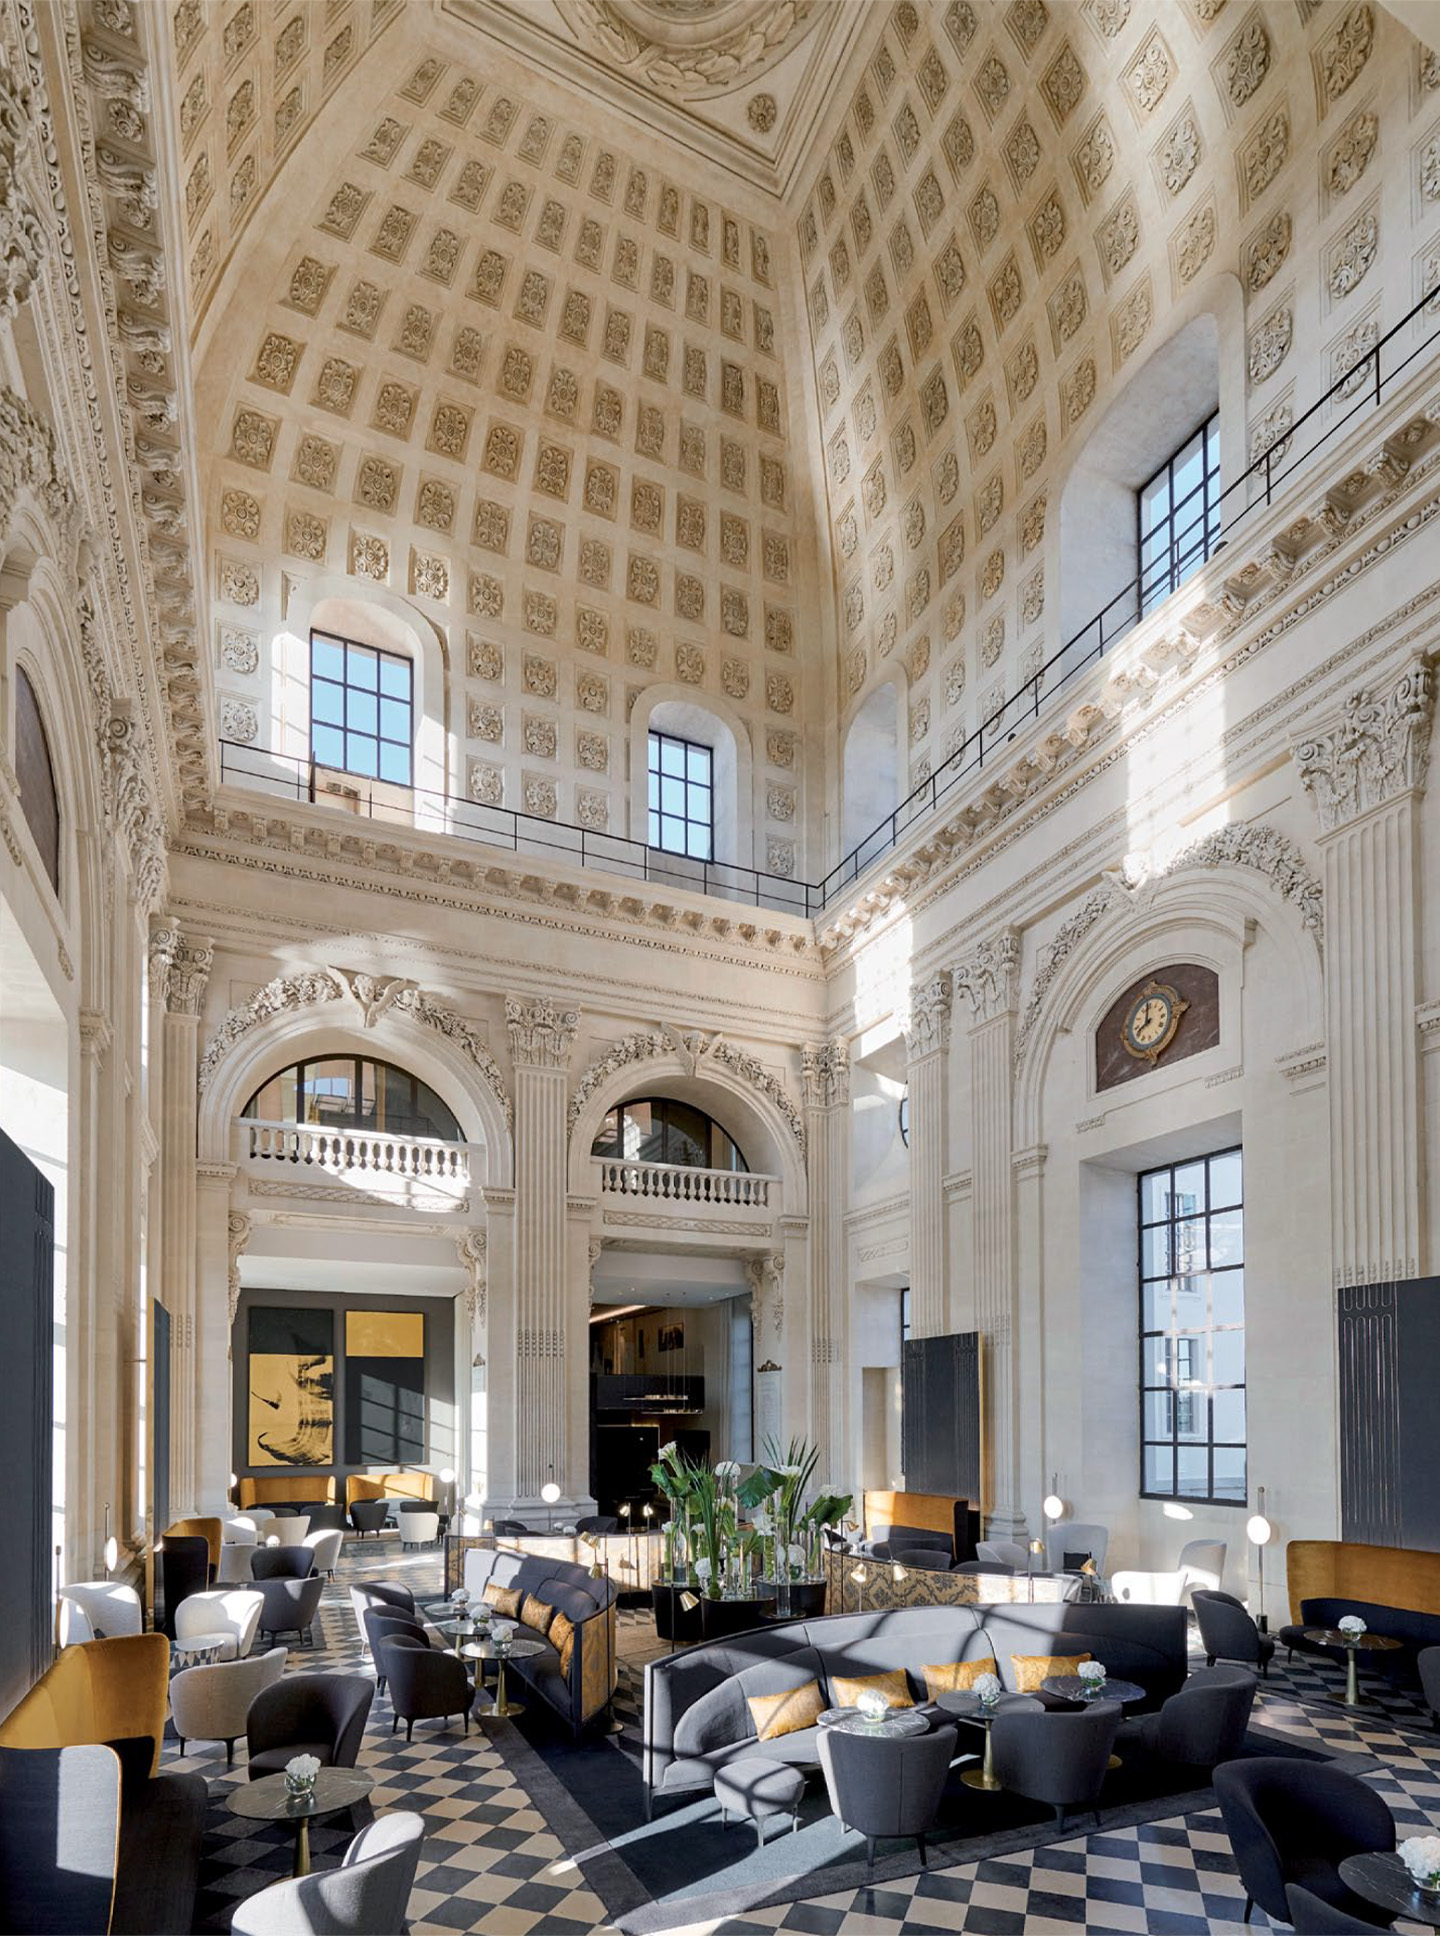 Article on the InterContinental Lyon Hotel Dieu realized by the studio jean-Philippe Nuel in the magazine Artravel, new luxury hotel, luxury interior design, historical heritage